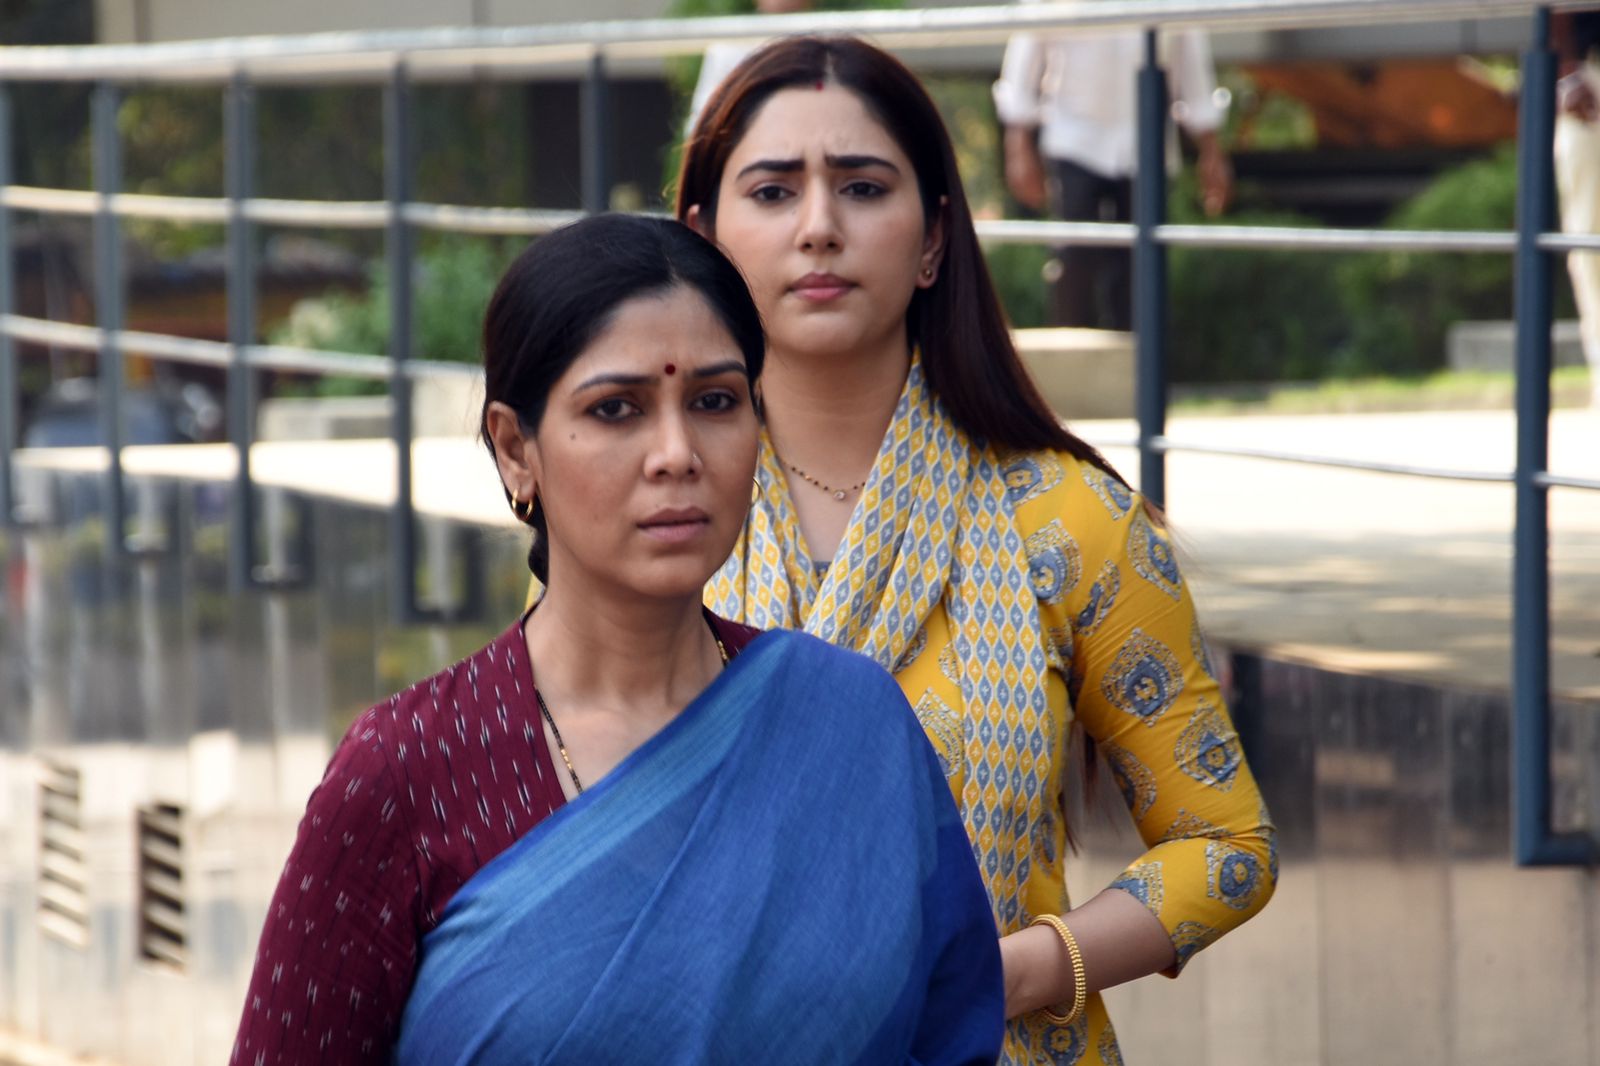 Celebrated actress Sakshi Tanwar to be seen in Bade Acche Lagte Hain 2! - Latest Bollywood News, Movie trailers